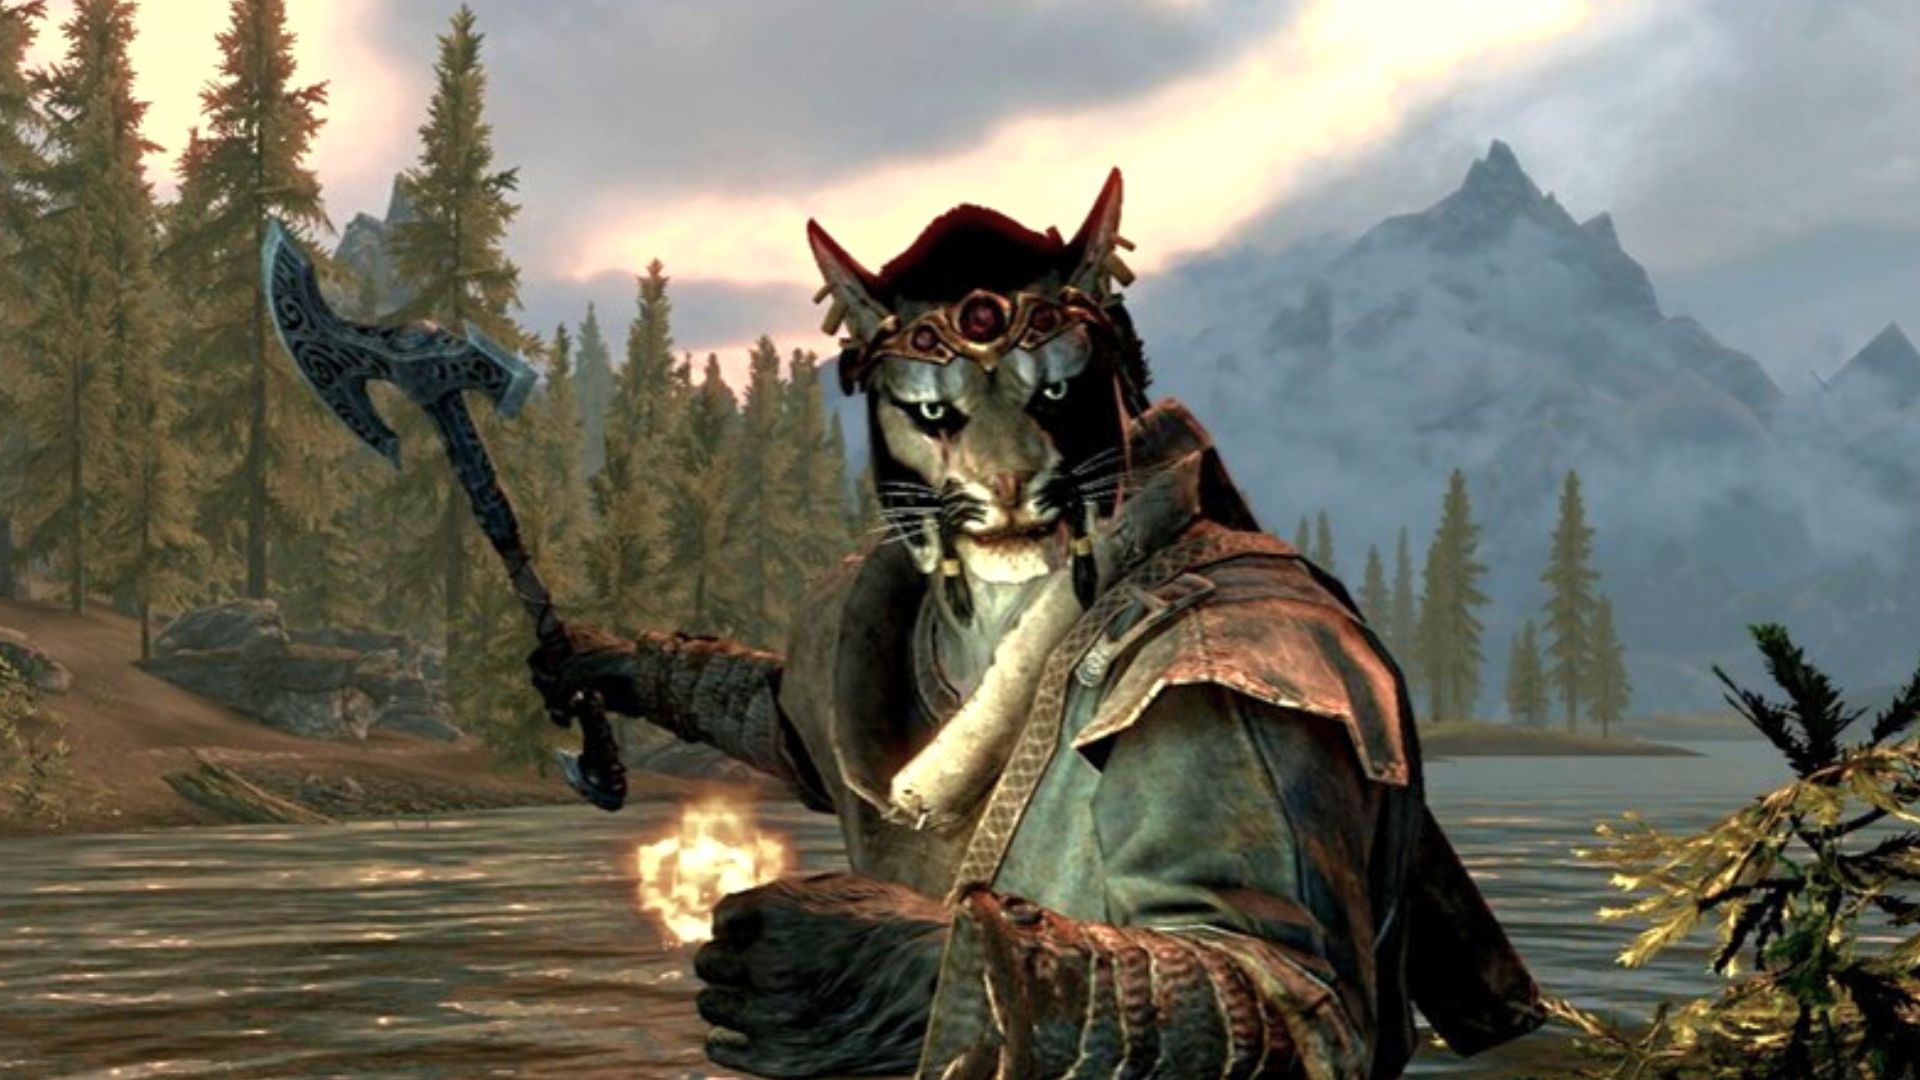 Skyrim's finally got what every first-person game needs, feet